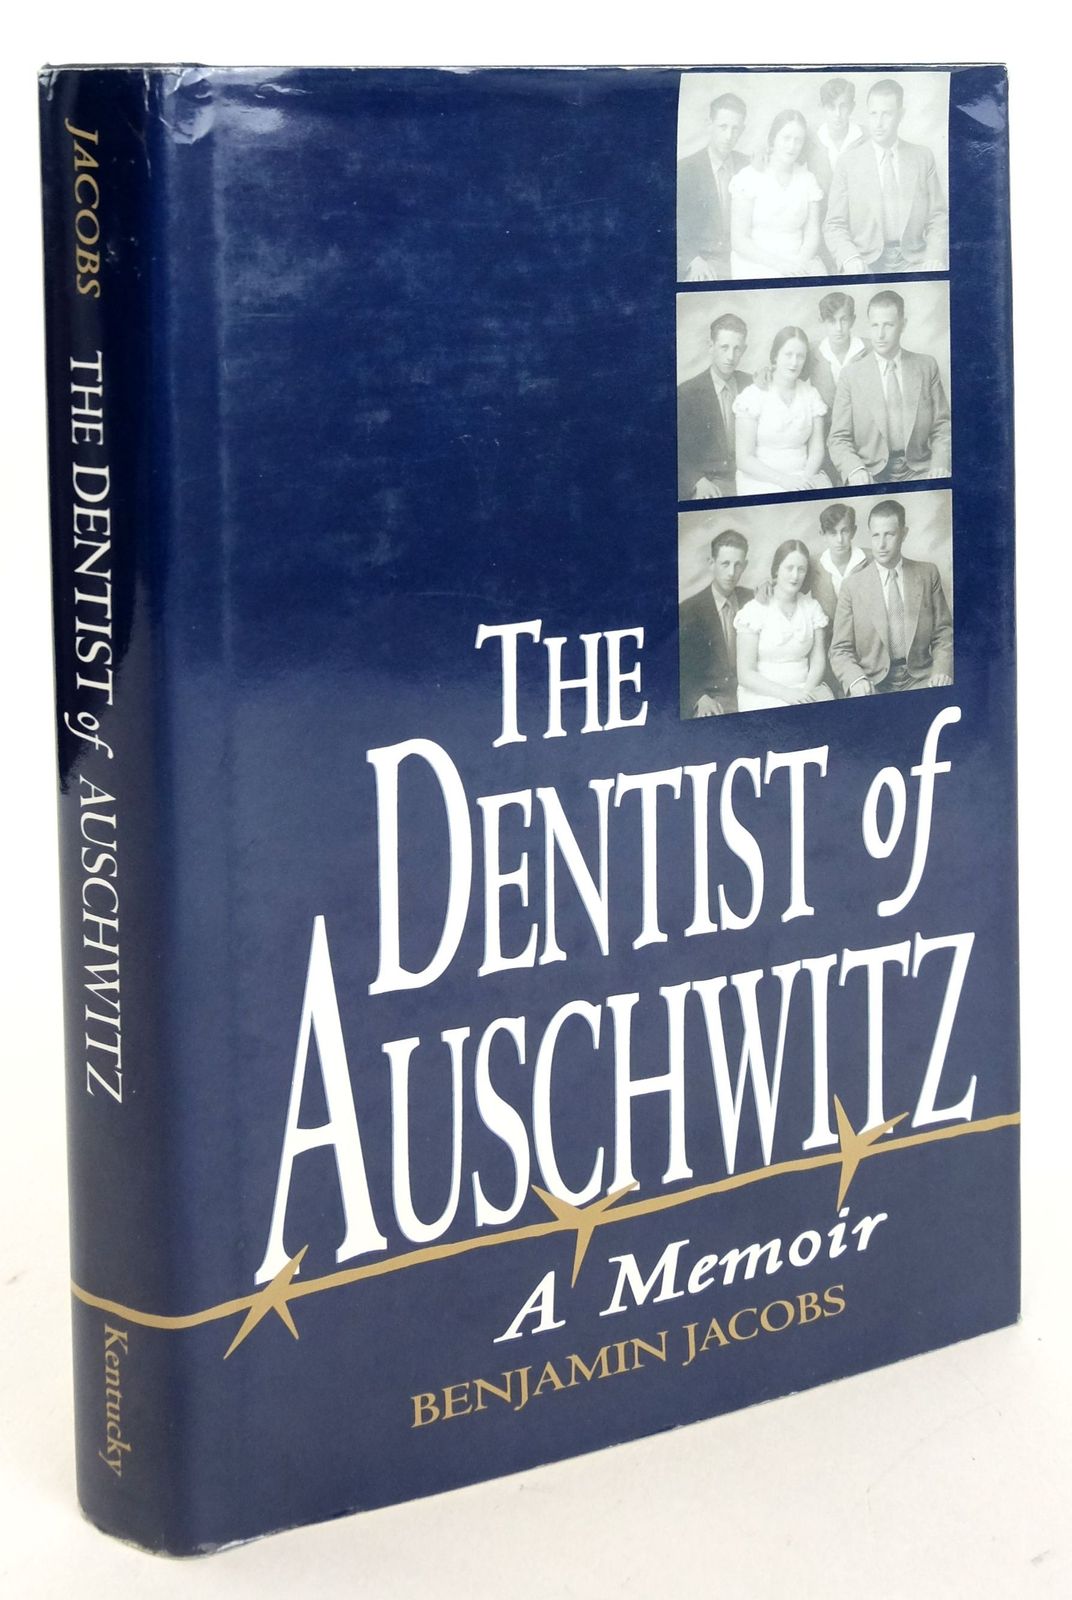 Photo of THE DENTIST OF AUSCHWITZ: A MEMOIR written by Jacobs, Benjamin published by University Press of Kentucky (STOCK CODE: 1819915)  for sale by Stella & Rose's Books